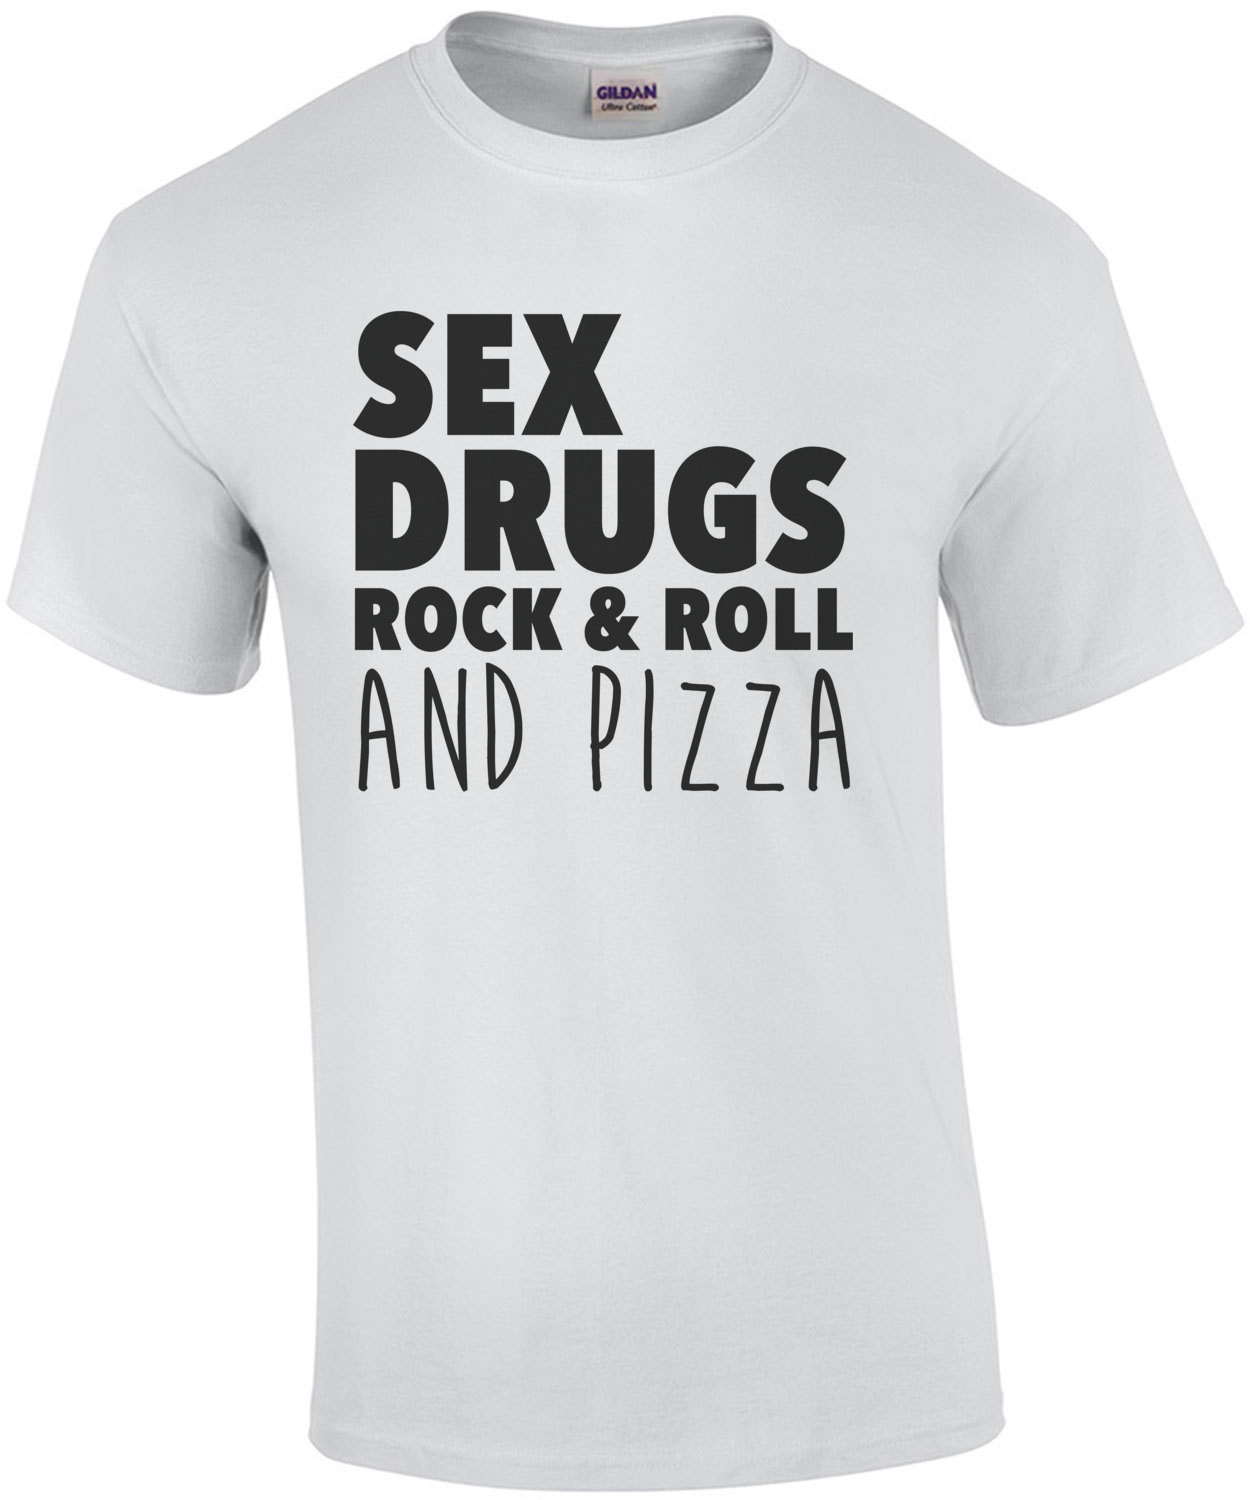 Sex Drugs Rock & Roll and pizza - funny t-shirt